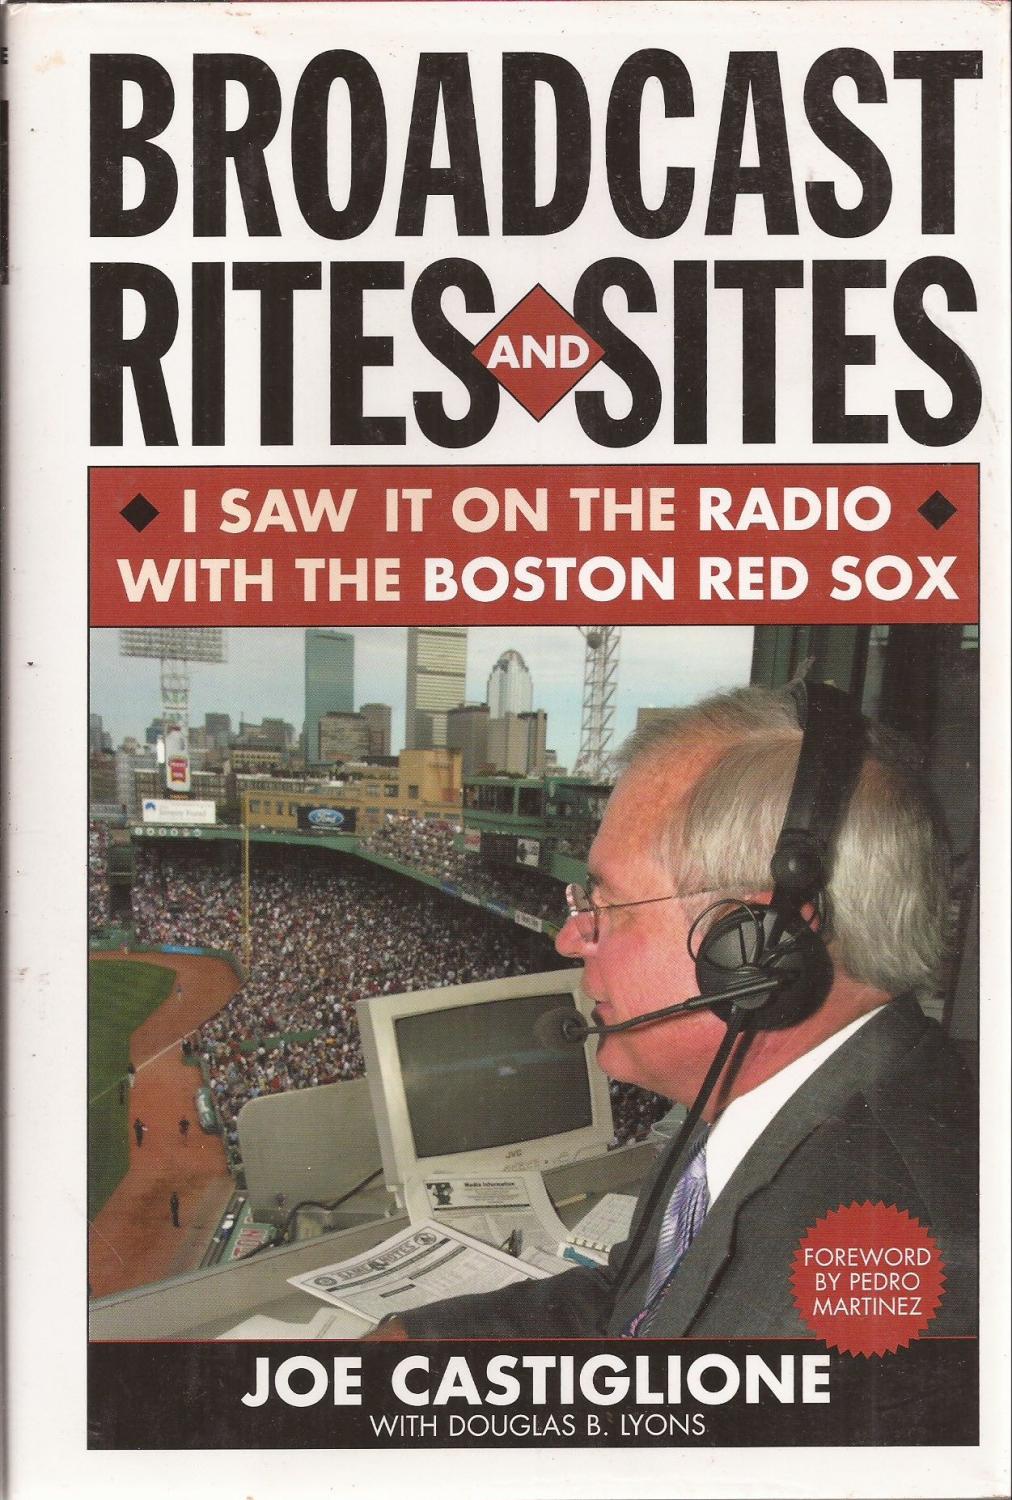 Broadcast Rites and Sites I Saw It on the Radio with the Boston Red Sox (inscribed association copy) by Castiglione, Joe with Douglas B